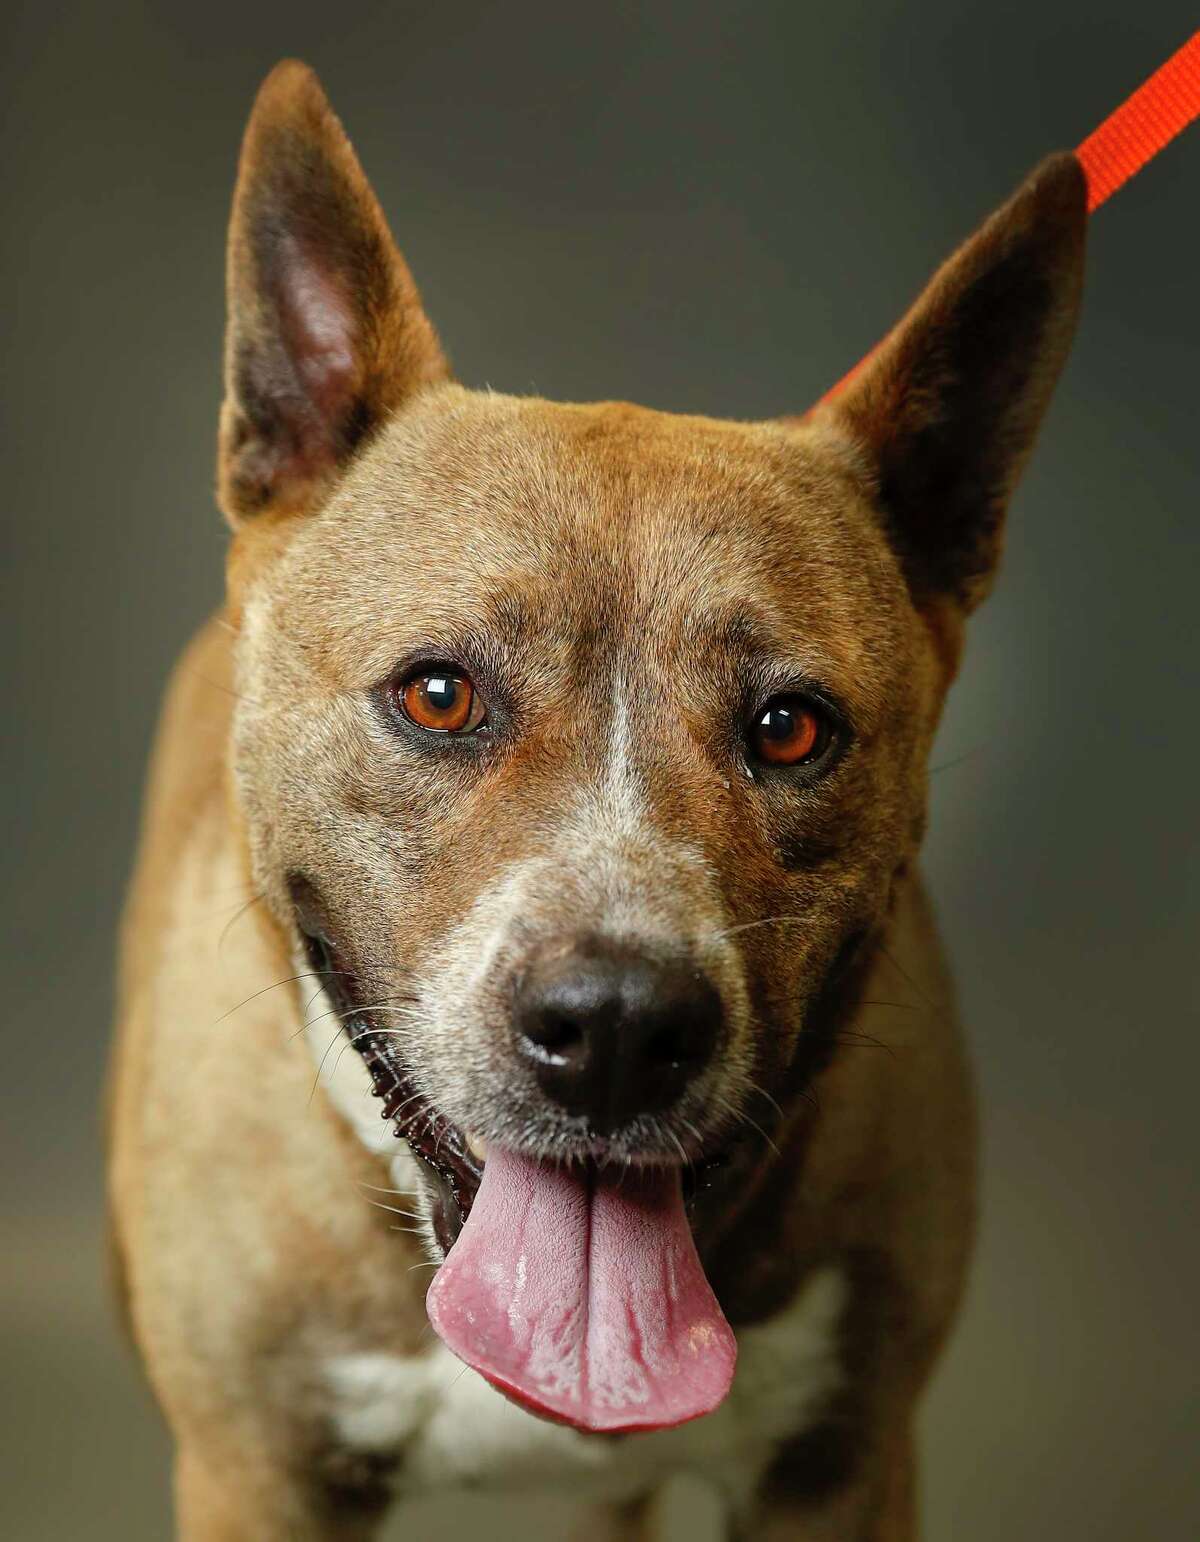 Chloe is a 5-year-old, female, American Staffordshire mix available for adoption at the Harris County Animal Shelter, in Houston. (Animal ID: A534362) Photographed Tuesday June 4, 2019. Chloe is a friendly dog who was surrendered by her owners for "wanting out".